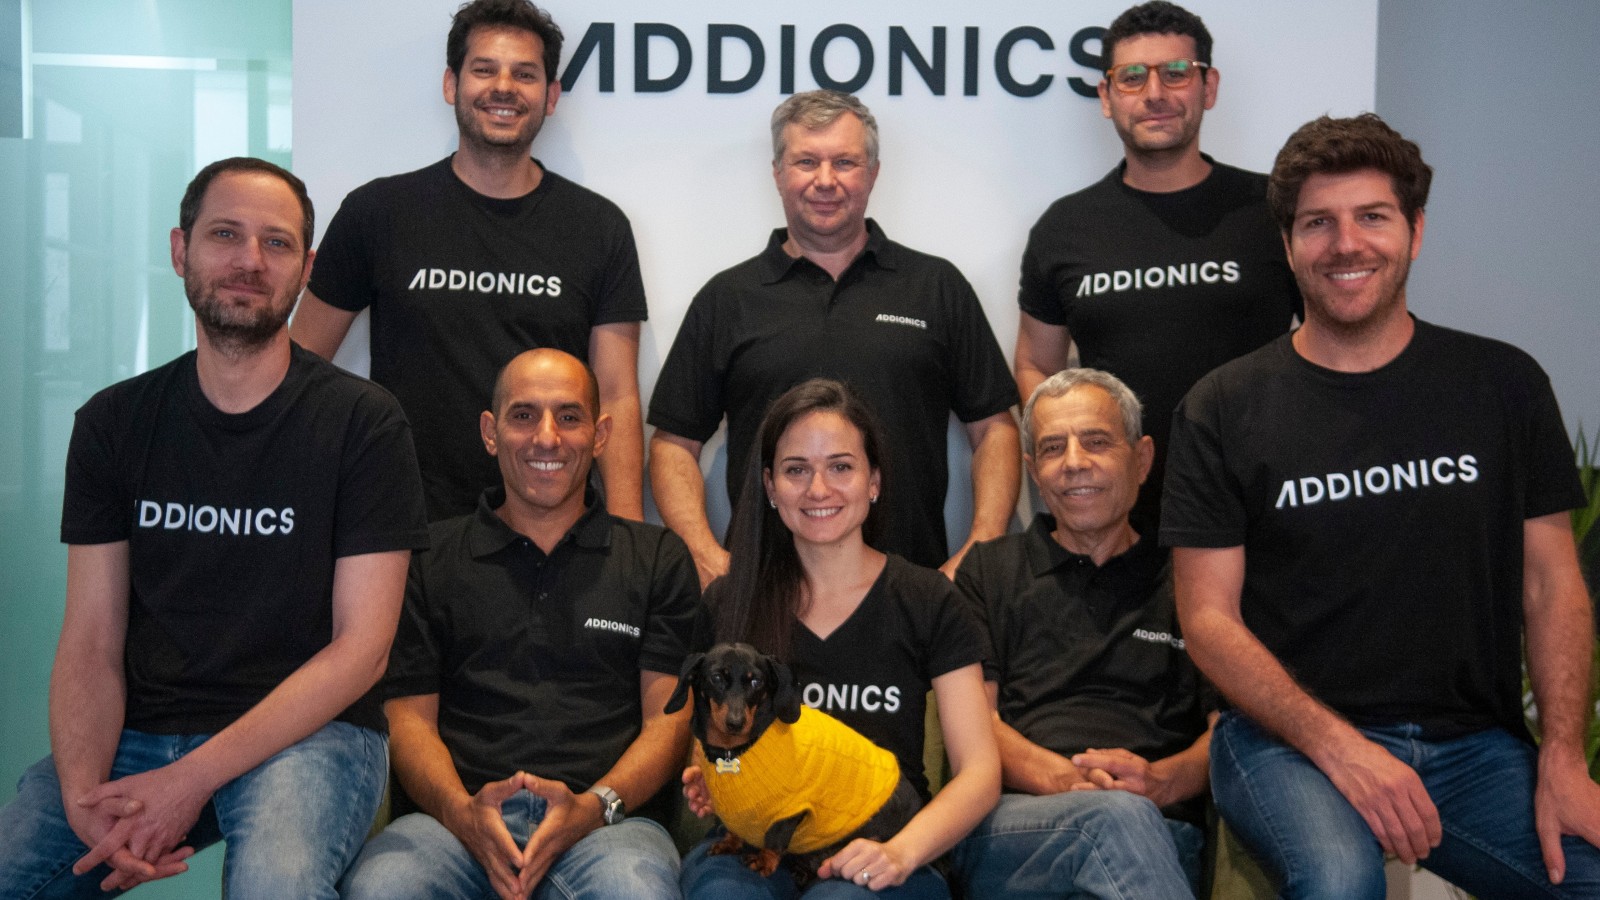 The Addionics team. “It’s a very ambitious goal, to change the architecture of batteries, which hasn’t been changed in the last 30 years,” says CEO Moshiel Biton. (Courtesy of Addionics)